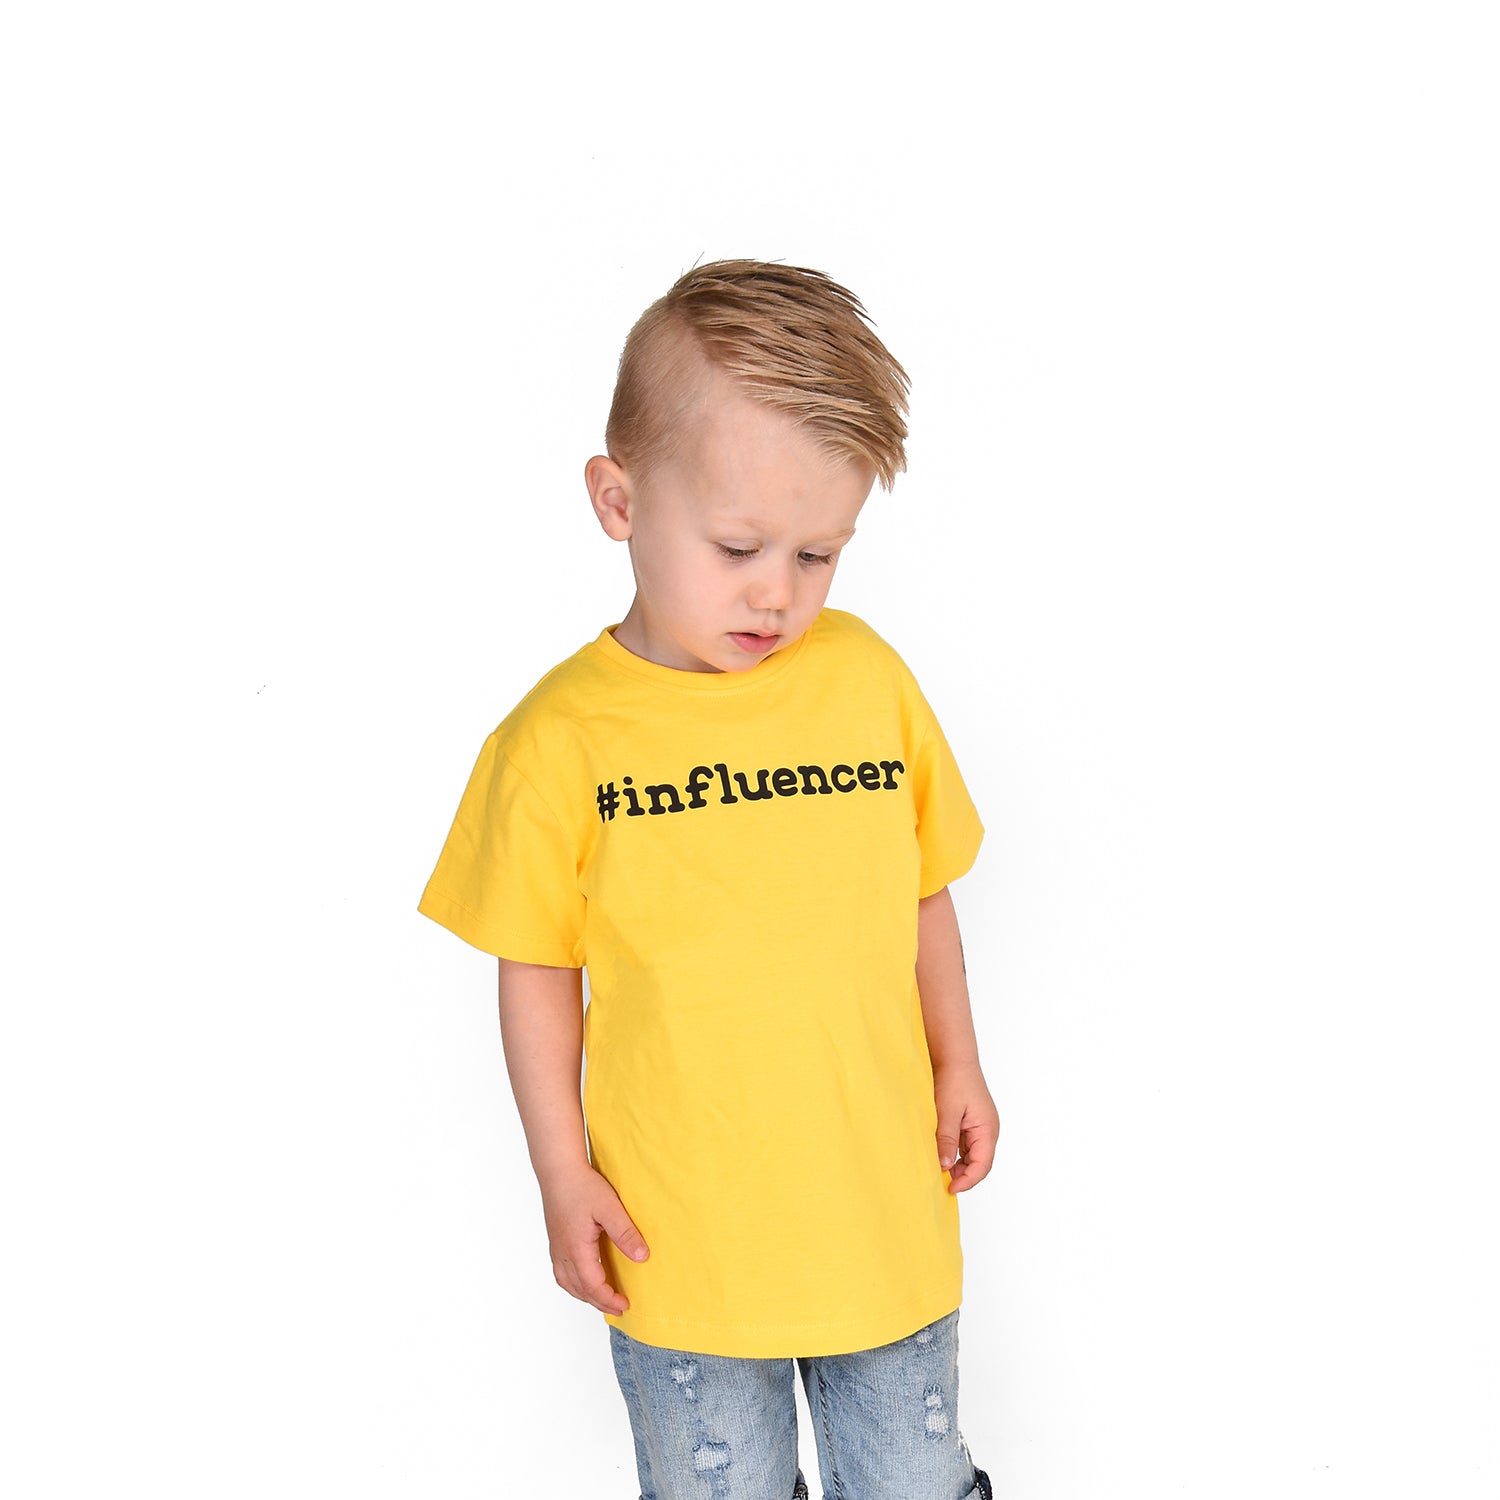 Blonde boy looking at his feet with yellow shirt, with '#influencer' print, by KMLeon.